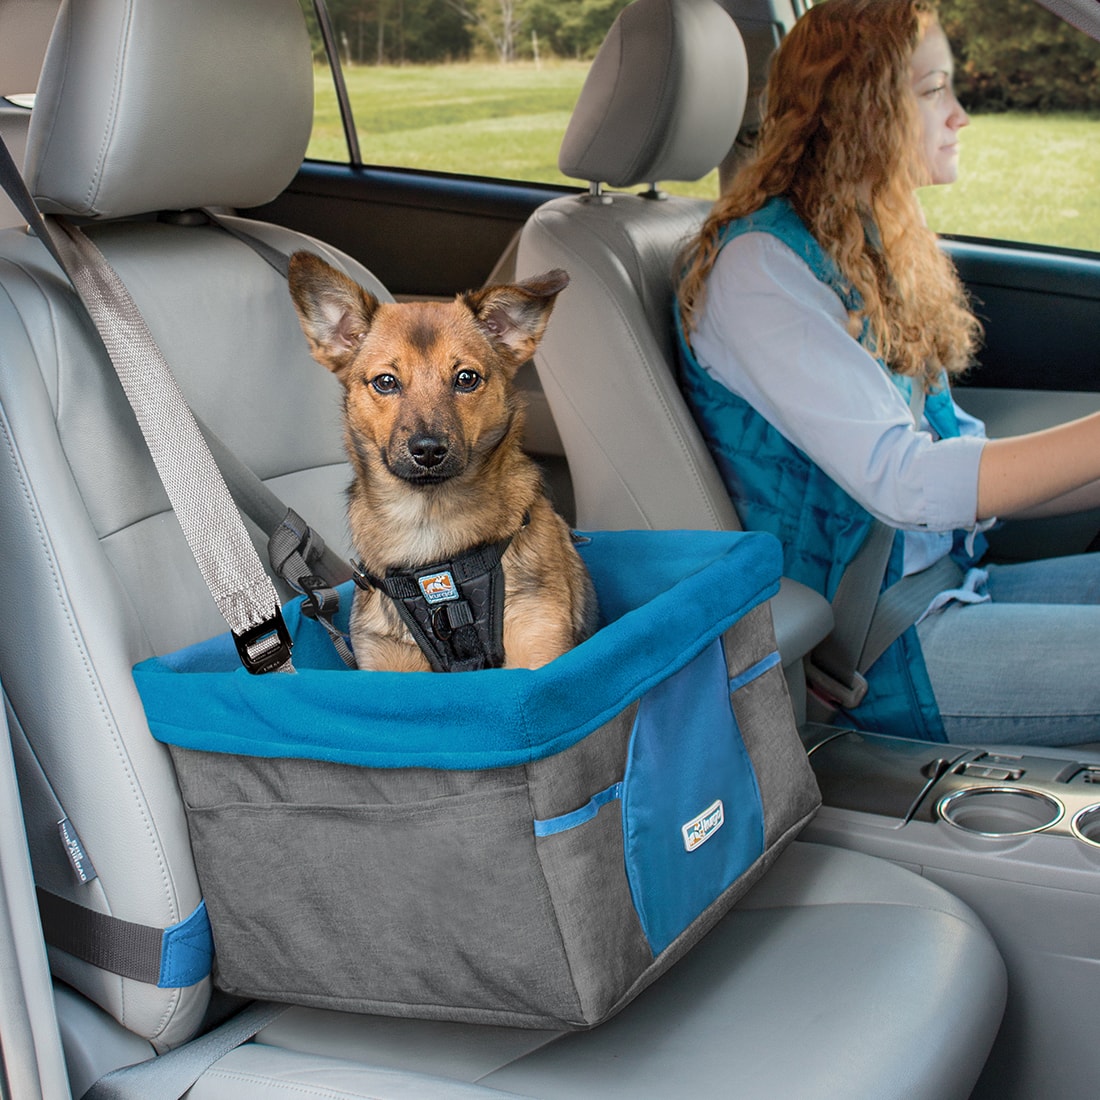 https://cdn.shopify.com/s/files/1/0554/6252/7165/products/Dog_Booster_Seat_Charcoal__89605.jpg?v=1618240168